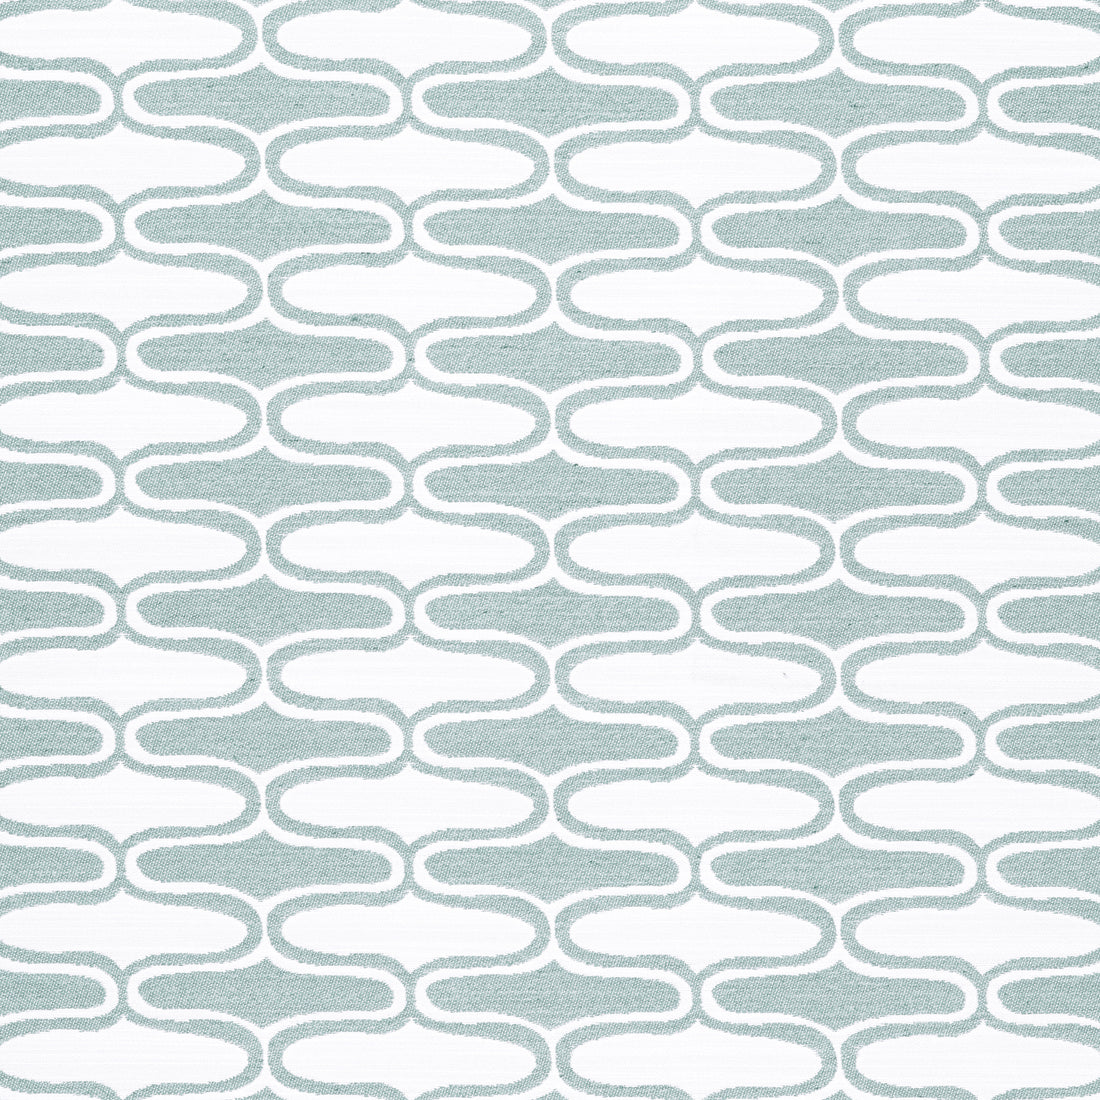 Saraband fabric in seafoam color - pattern number W8530 - by Thibaut in the Villa collection